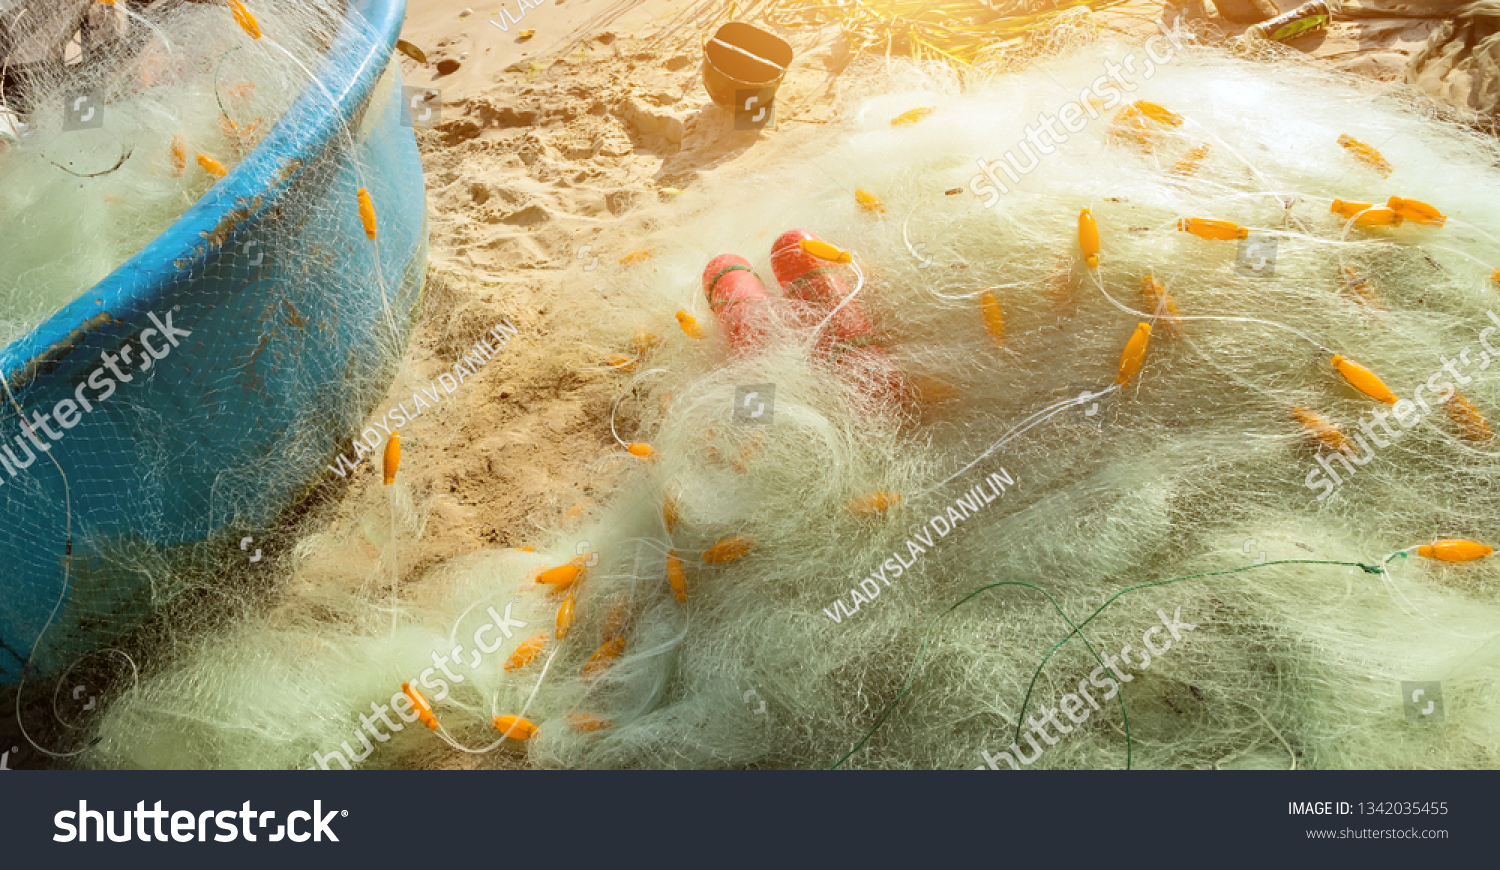 Nylon fishing net with float line attached to small plastic floats in the basket boats on the beach Vietnam #1342035455